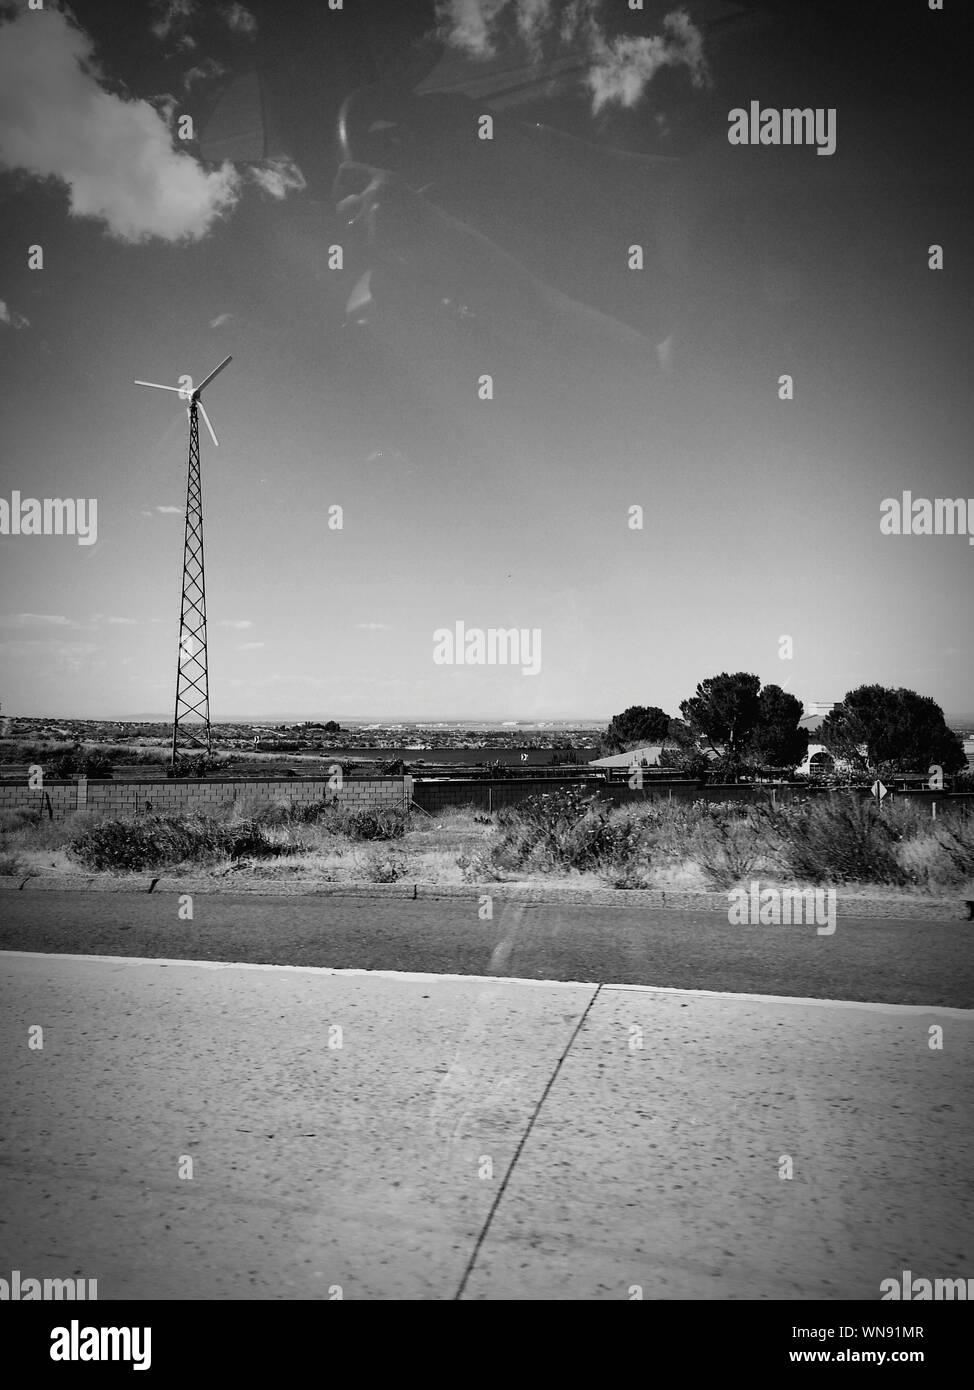 View Of Wind Turbine On Landscape Against Sky Stock Photo